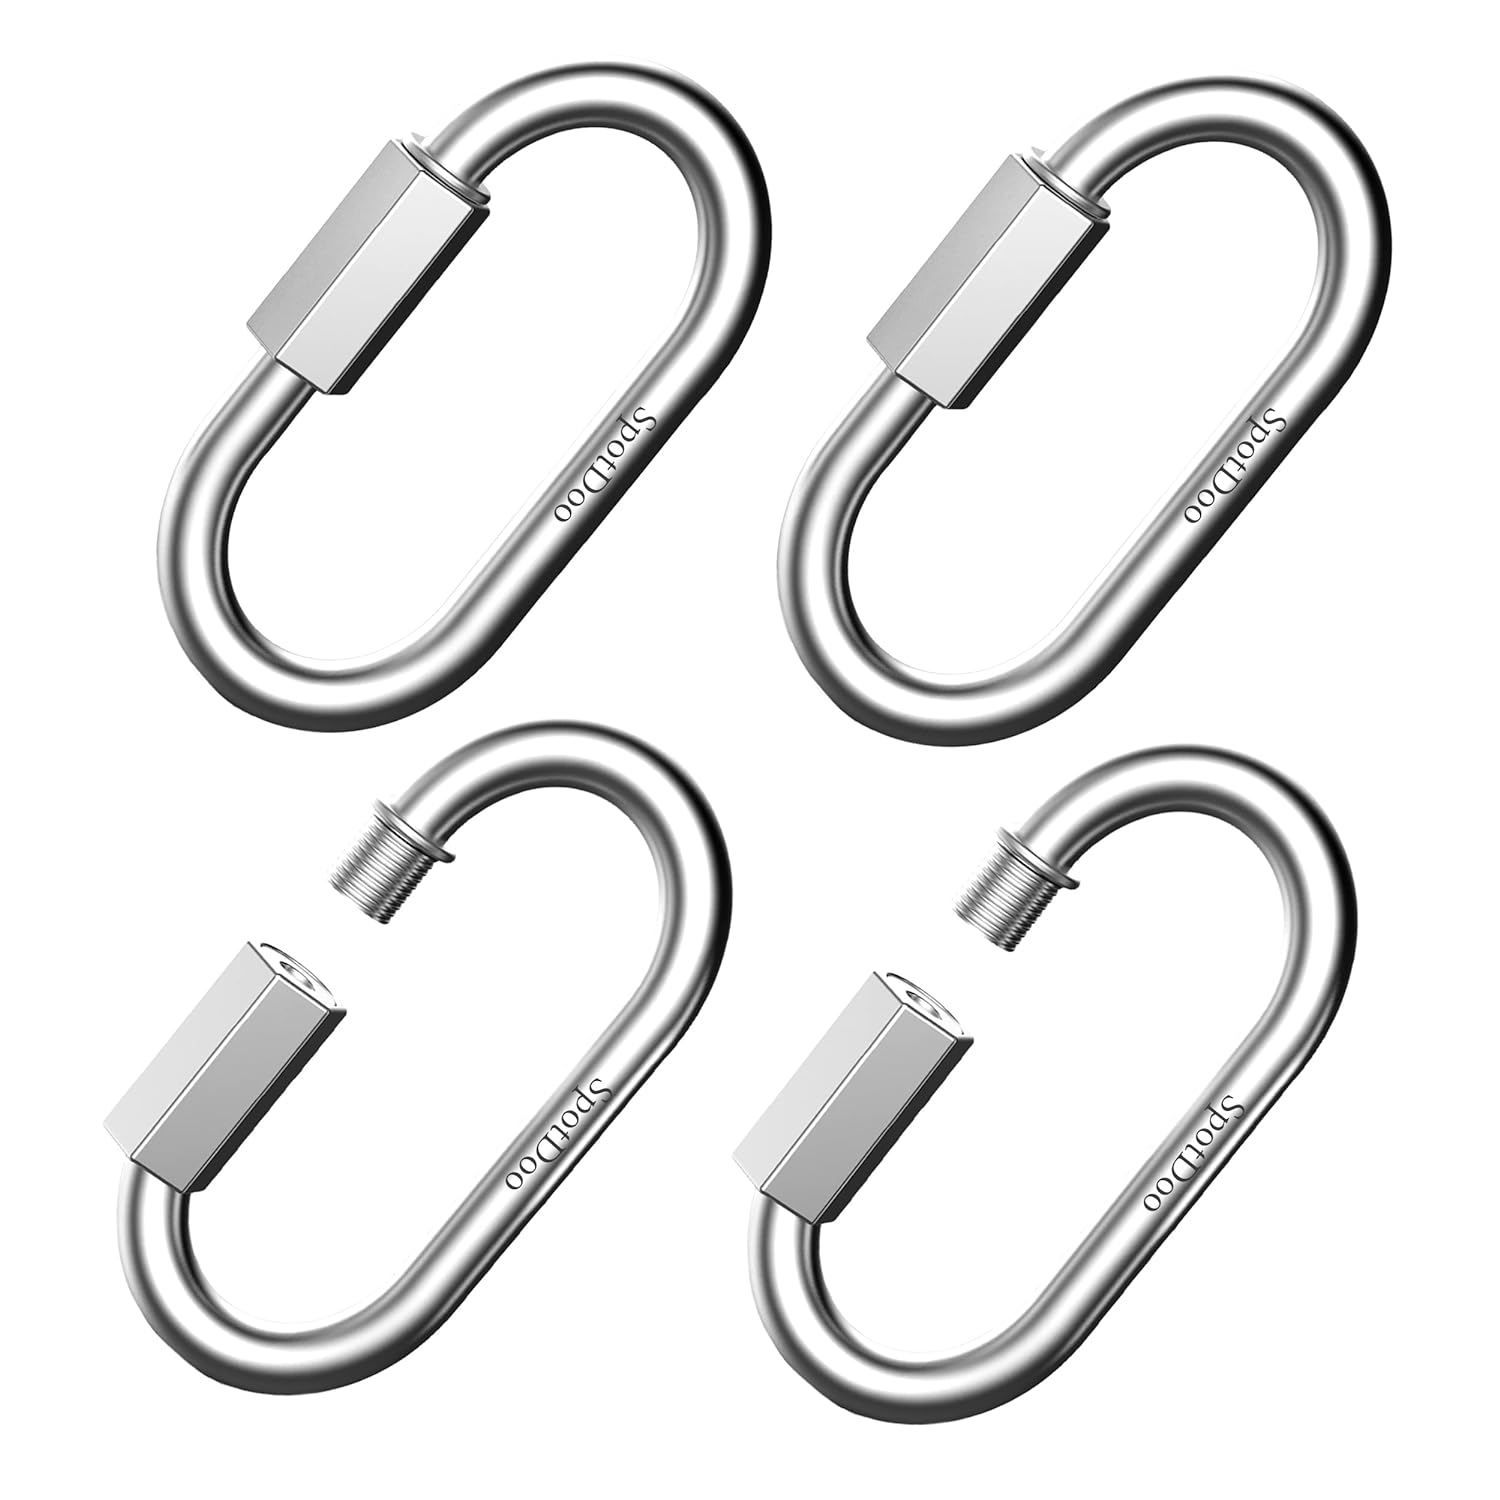 Generic SpotDoo 4-Pack 3 Inch Stainless-Steel Chain Quick Links - 5/16 Inch Diameter Heavy Duty Locking Carabiner(1523 Lbs), Chain Conn